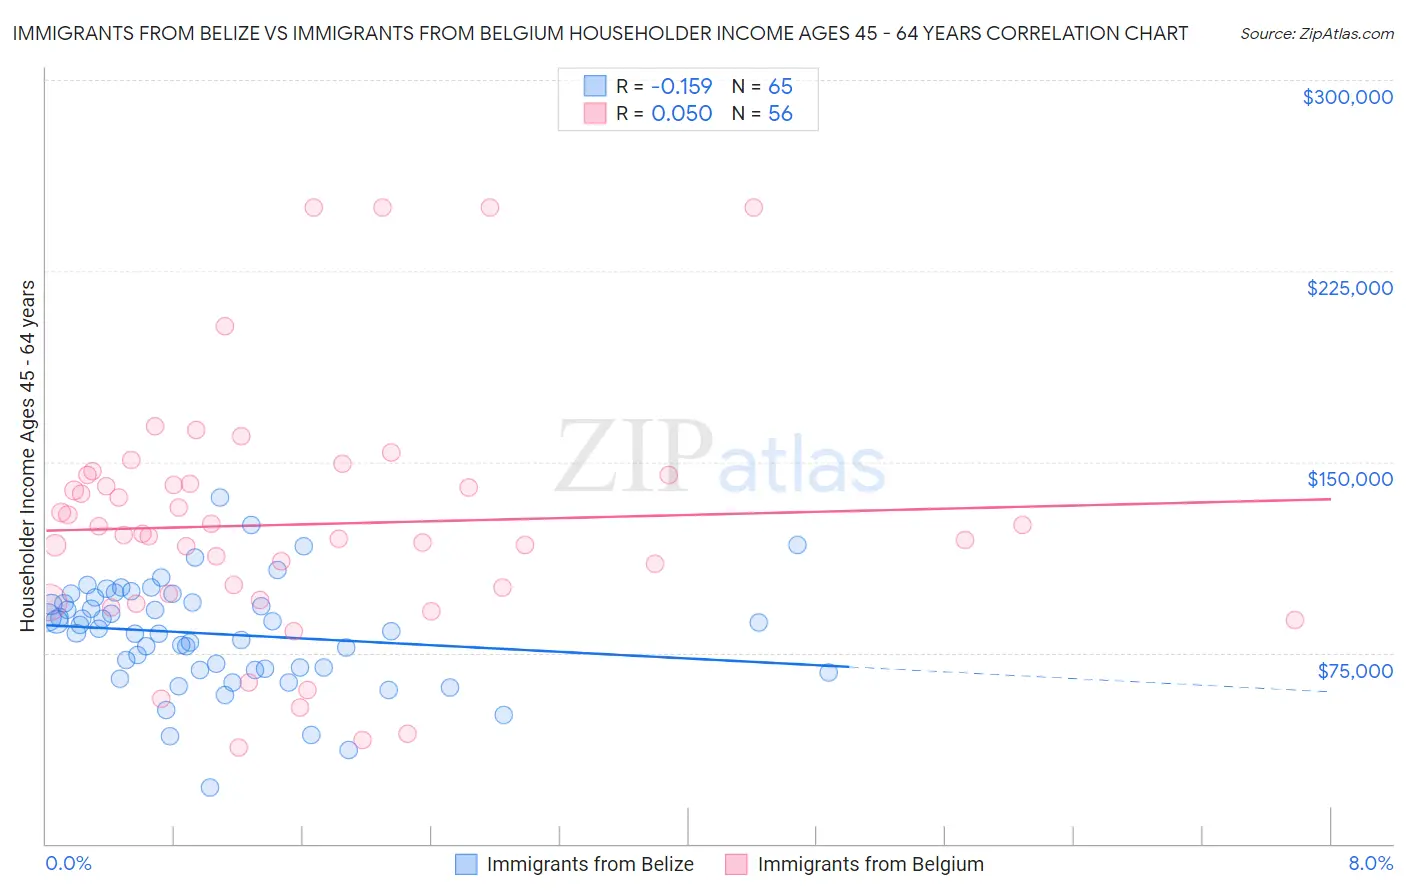 Immigrants from Belize vs Immigrants from Belgium Householder Income Ages 45 - 64 years